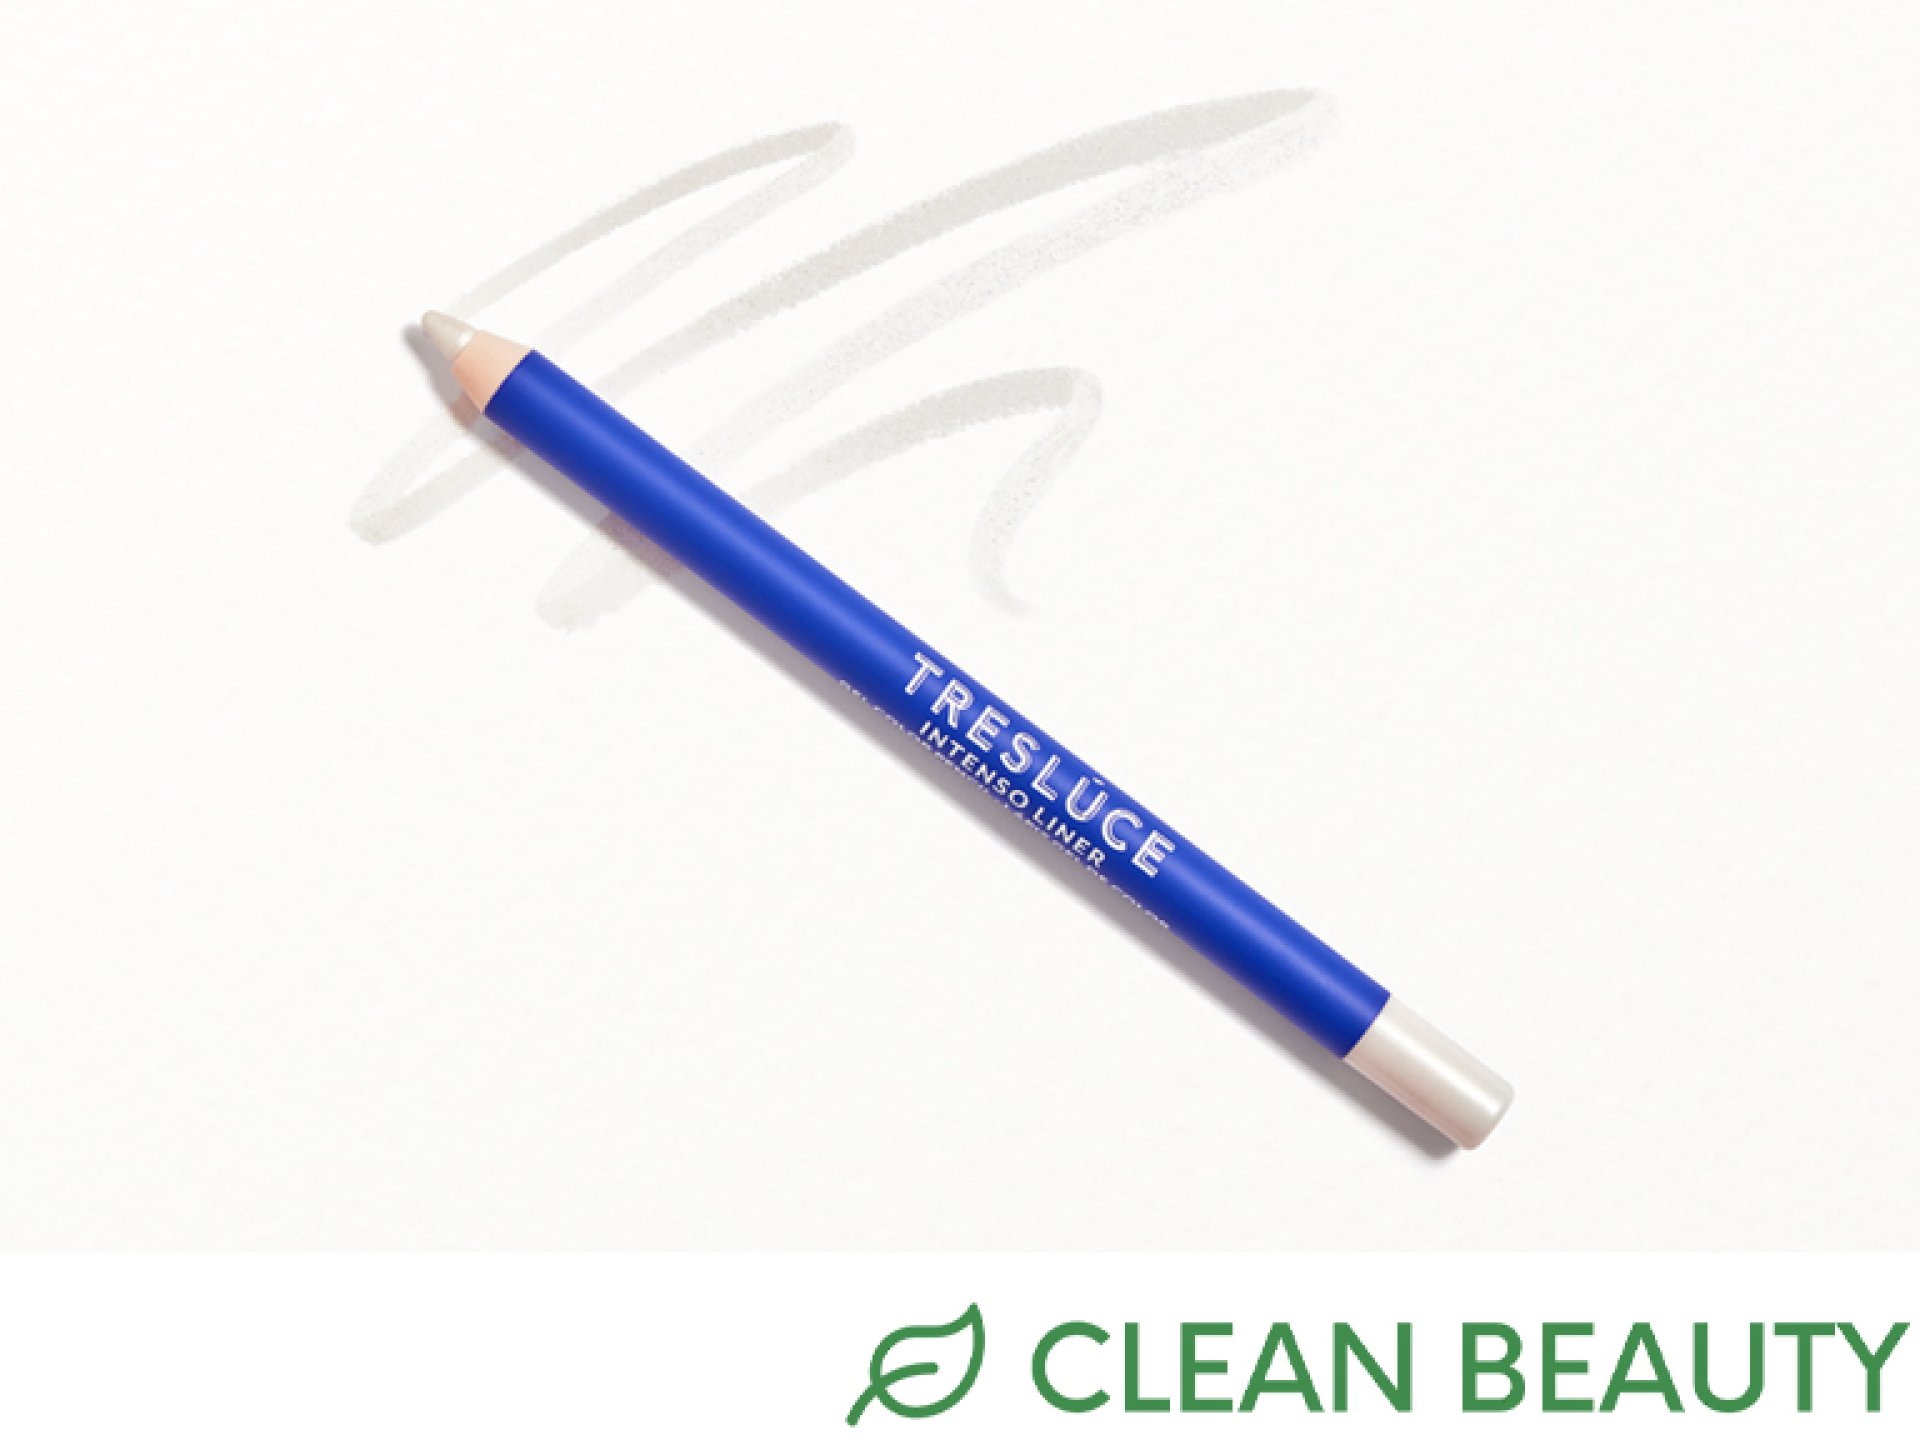 TRESLÚCE BEAUTY Intenso Liner in Icy_Clean